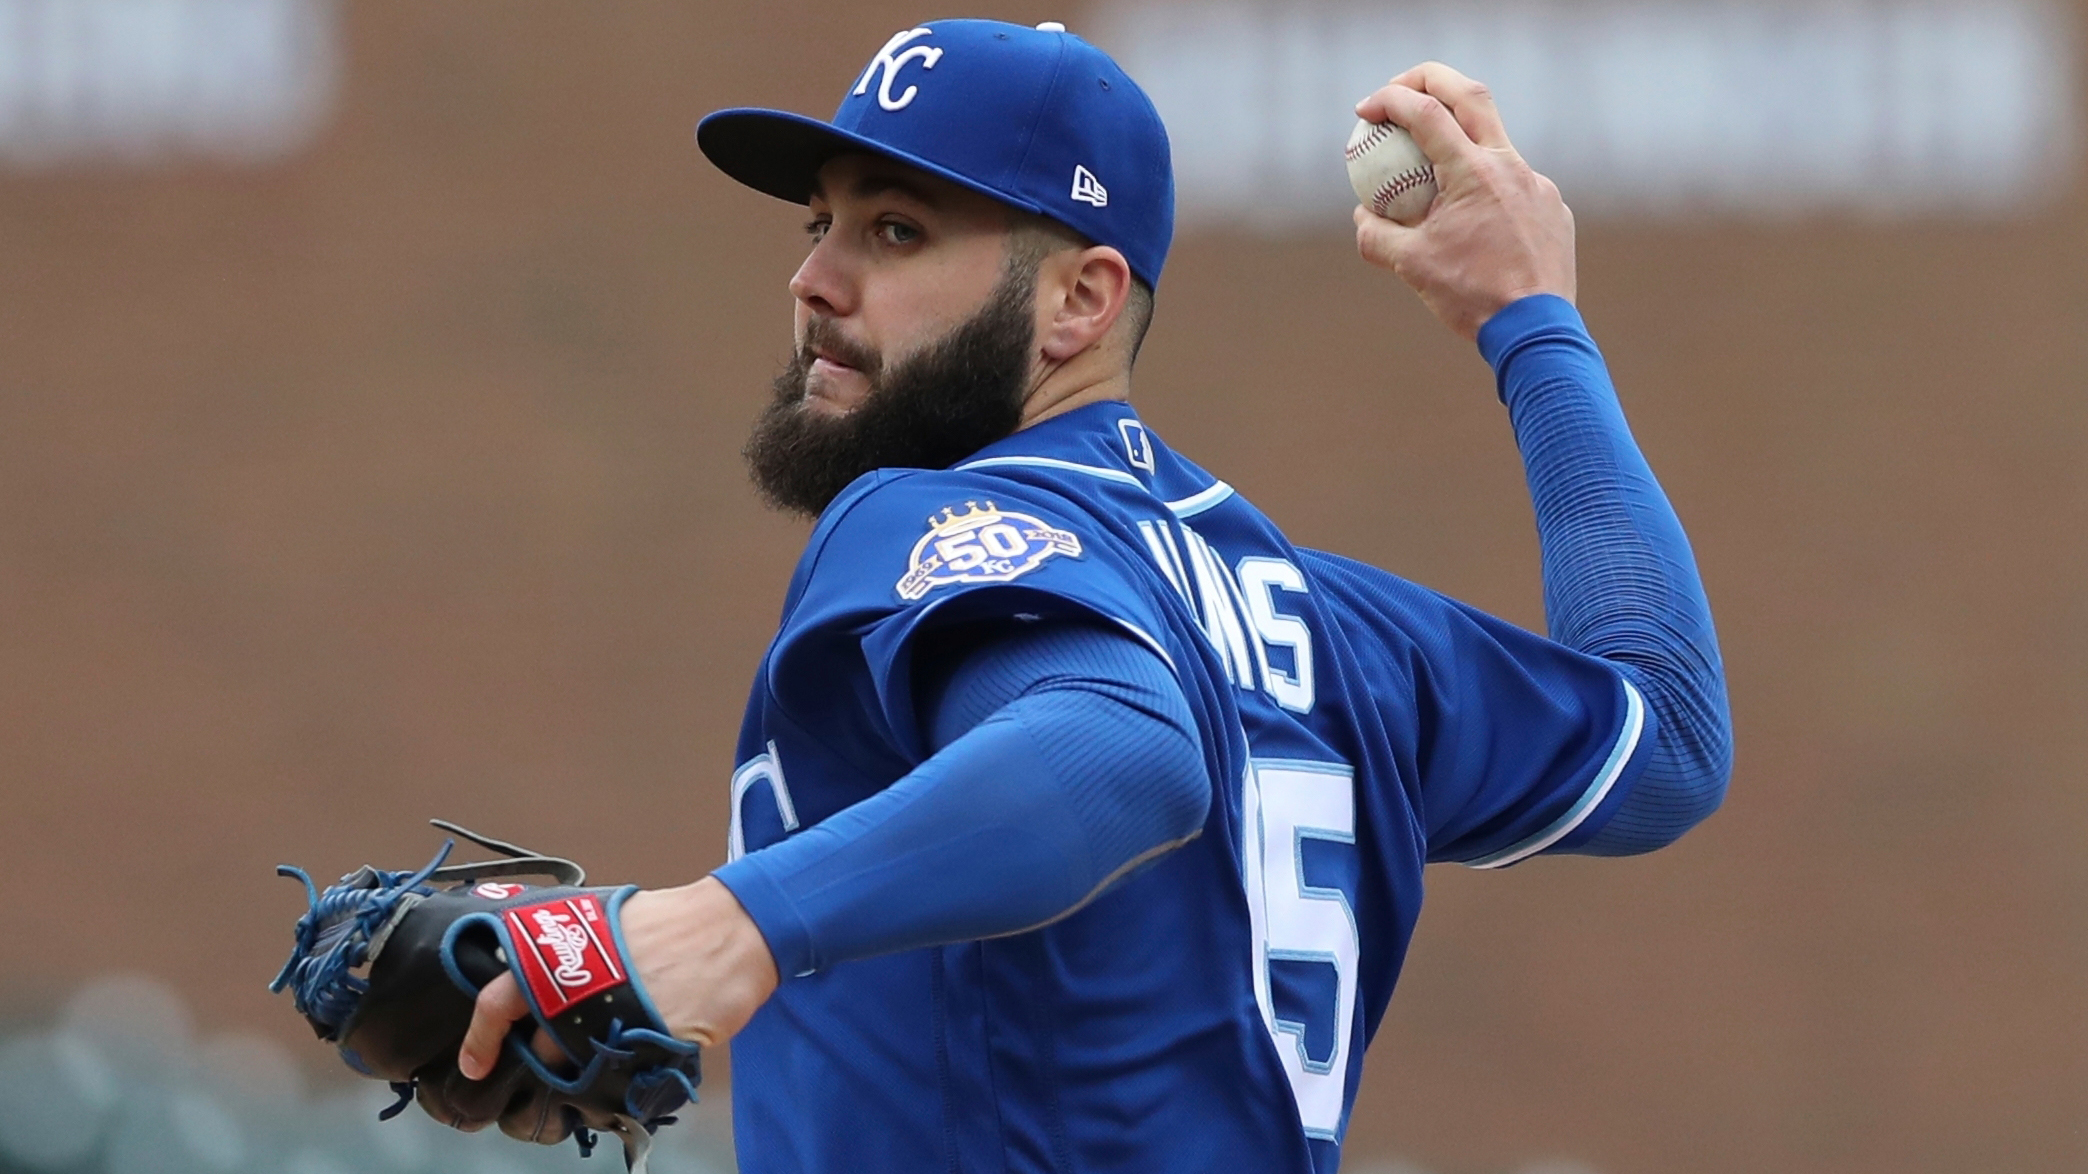 Junis spins a beauty as Royals beat Tigers 1-0 for first win of '18